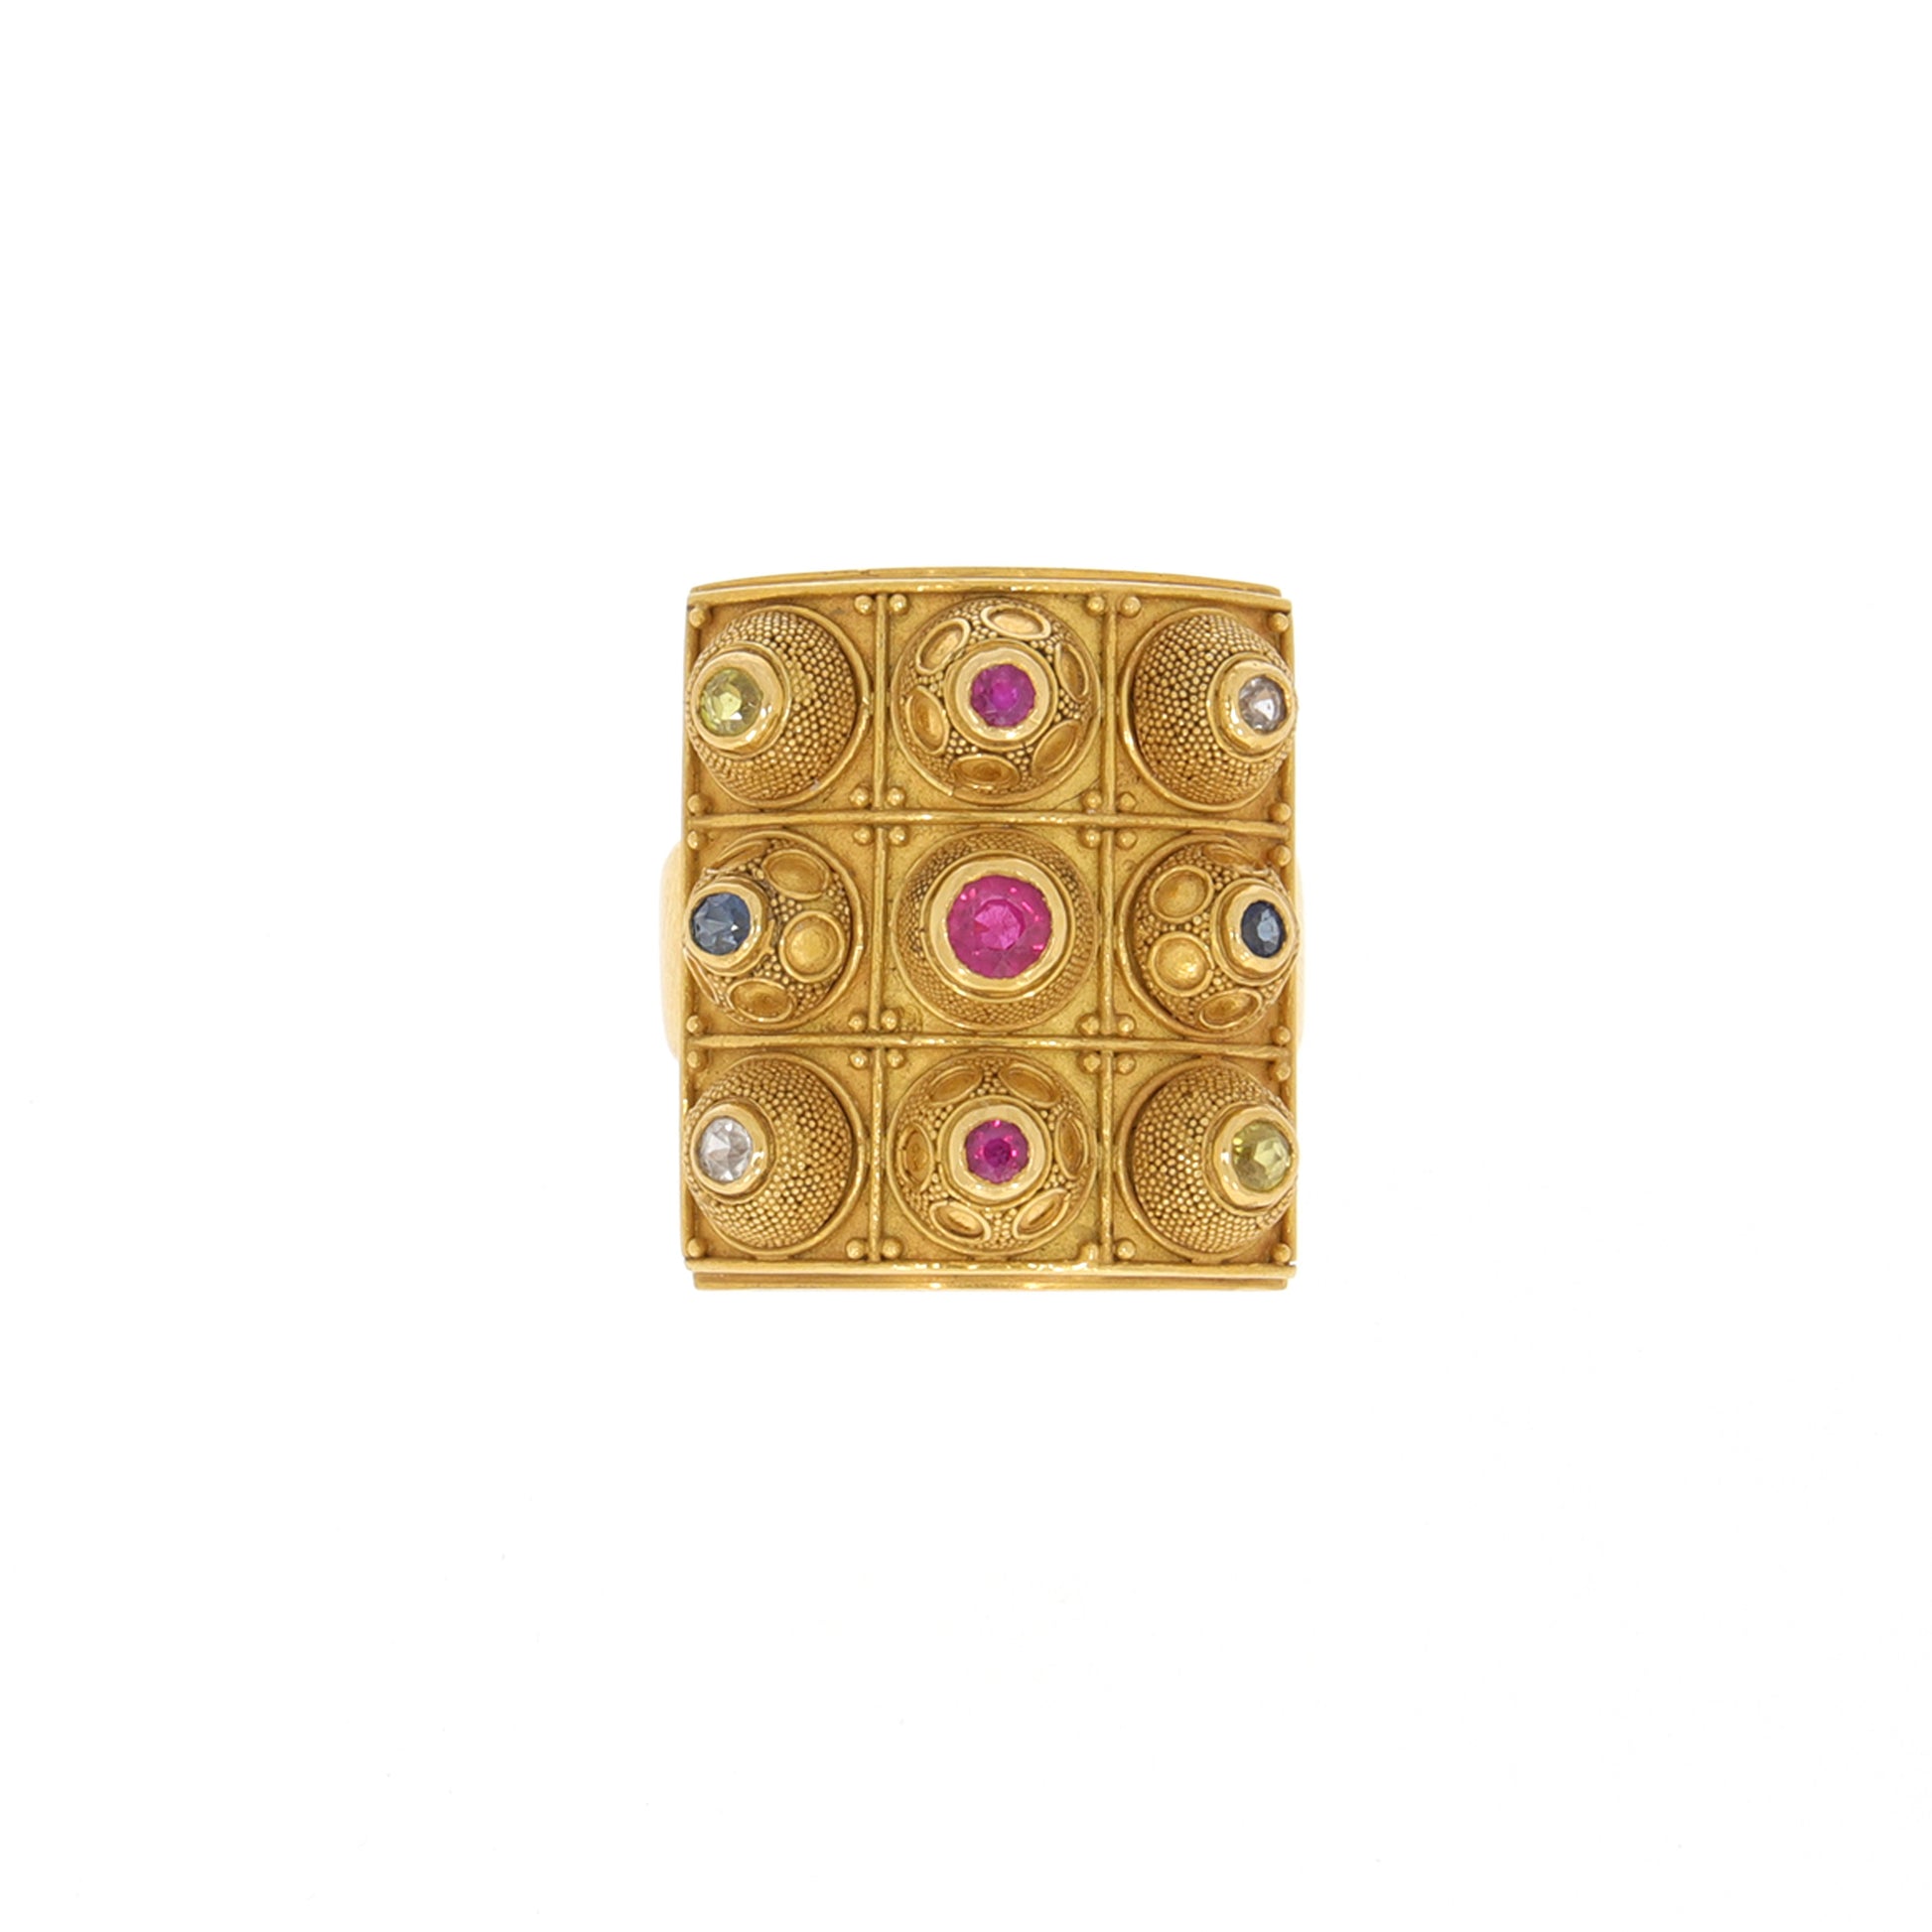 Elisabeth Treskow German 1940s 18KT Yellow Gold Ruby & Sapphire Granulation Ring front view